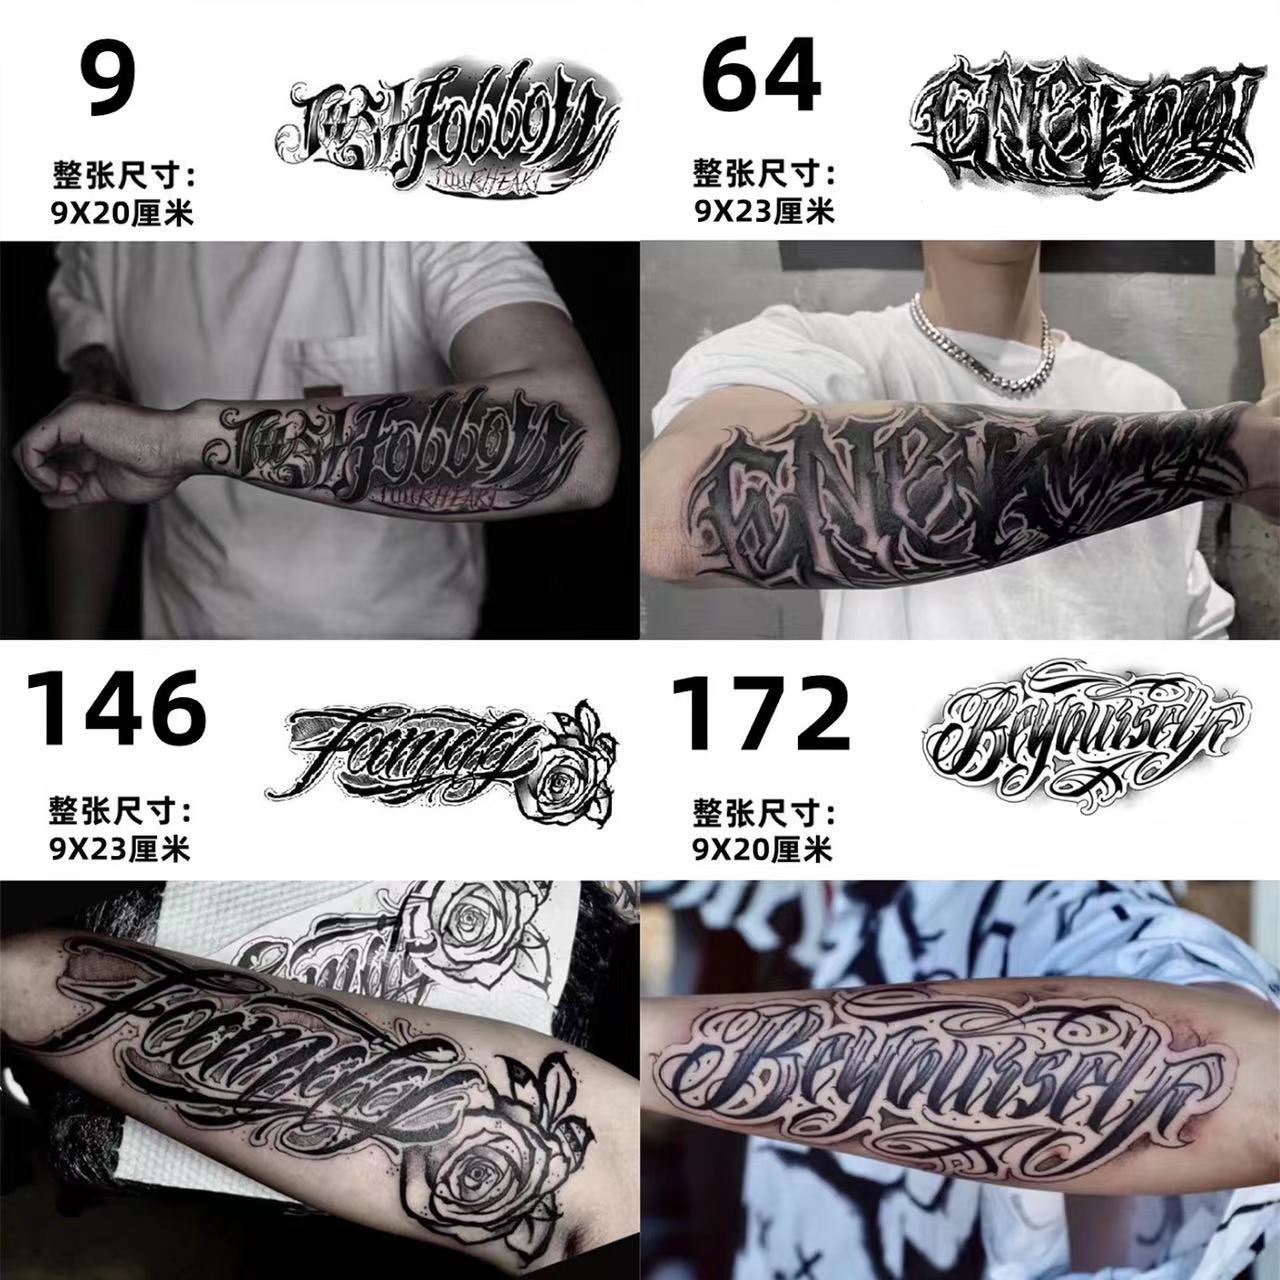 Juice herbal tattoo stickers semi-permanent lasting 15 days dark blue and white arm slow color gradient can not be washed off waterproof